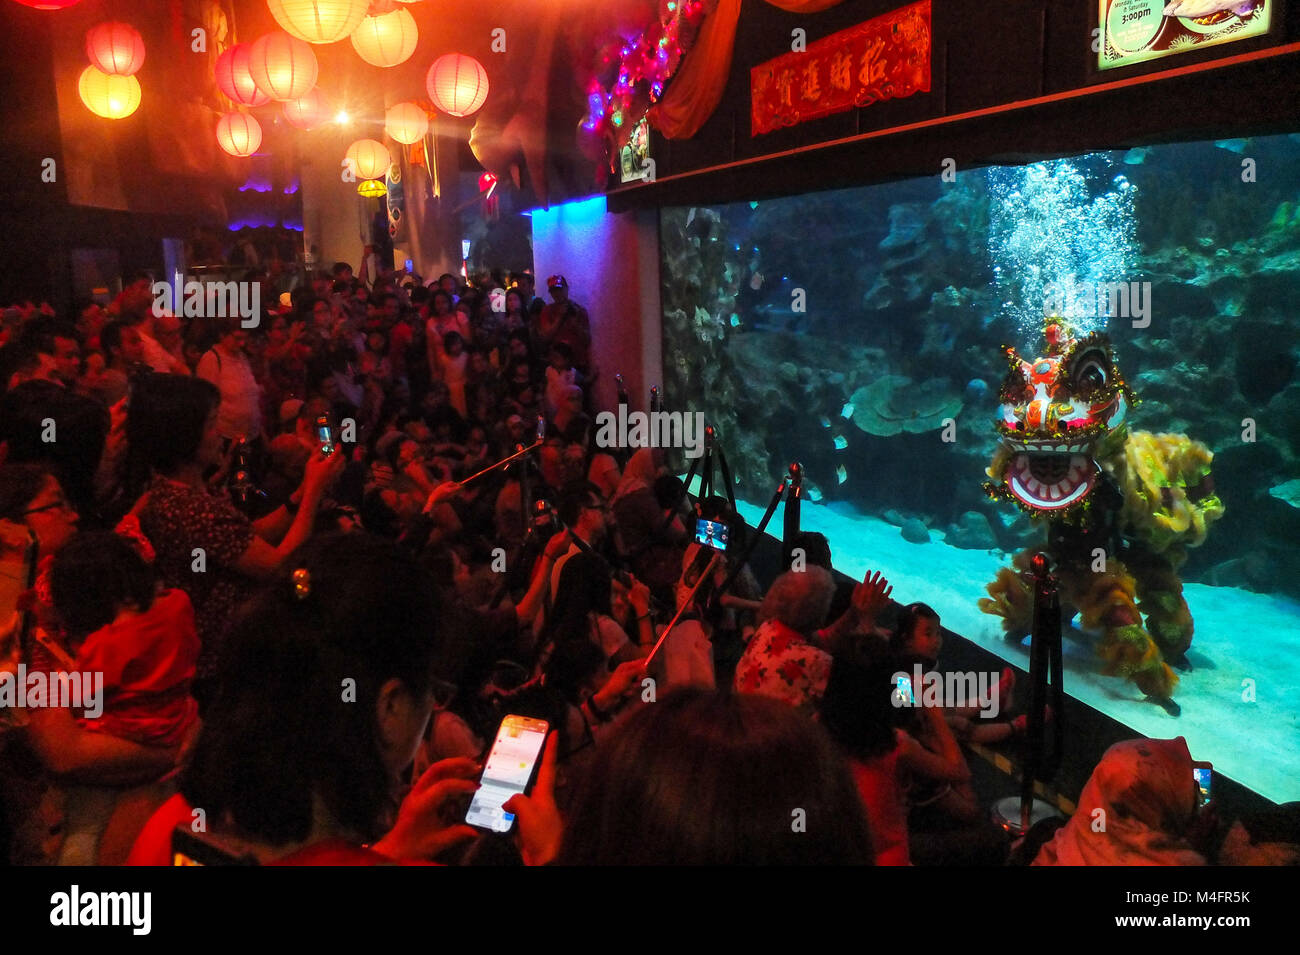 KUALA LUMPUR, MALAYSIA - FEBRUARY 16: People watch a chinese Lion dance performances by professional diver   inside the Aquaria KLCC during Chinese New Year celebration in Kuala Lumpur on February 16, 2018. The Chinese Lunar New Year on February 16 will welcome the Year of the dog (also known as the Year of the Earth Dog). (Photo by Samsul Said/AFLO) (MALAYSIA) Stock Photo